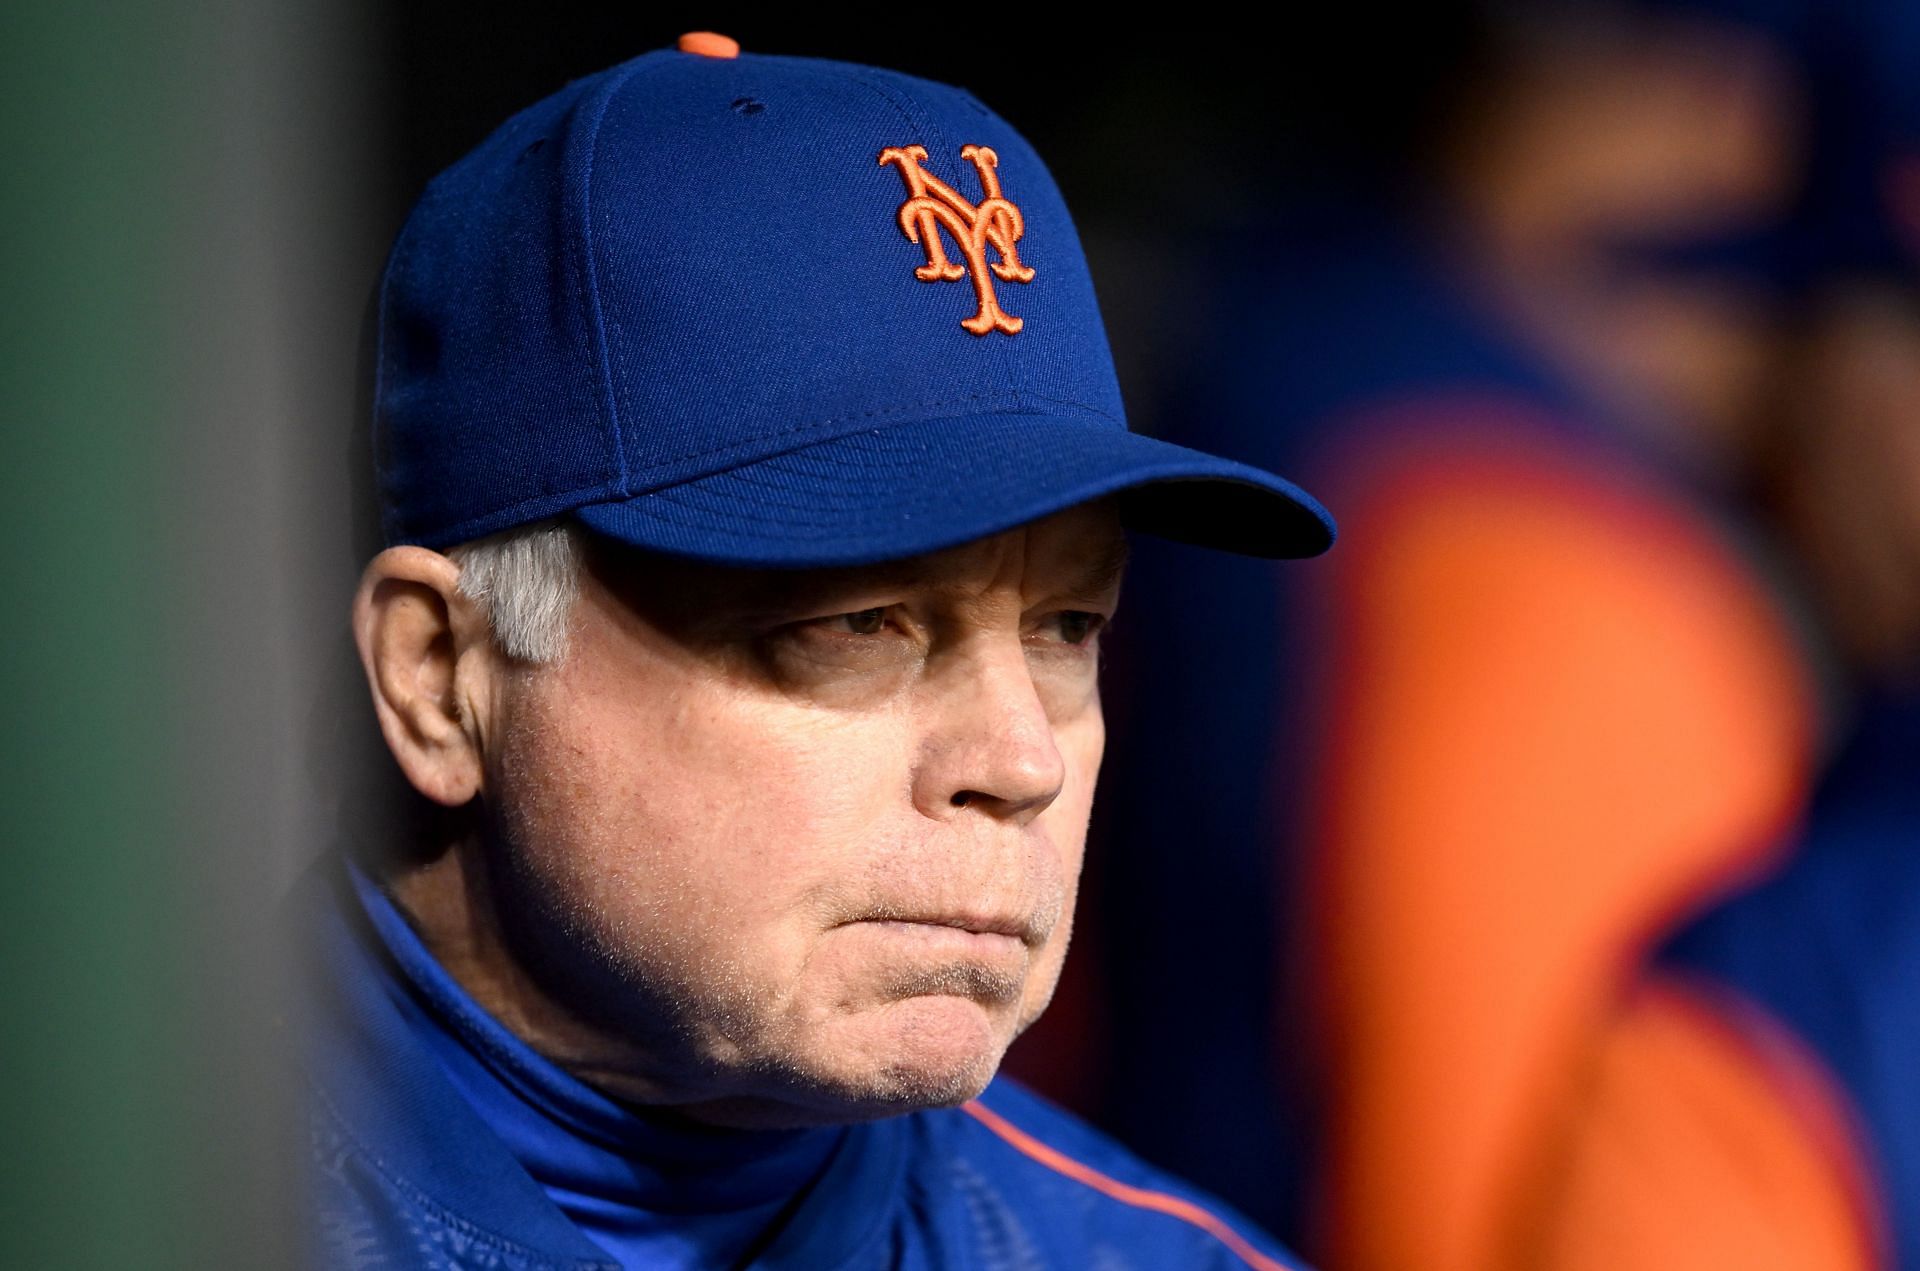 New York Mets manager had the most unusual response to being asked